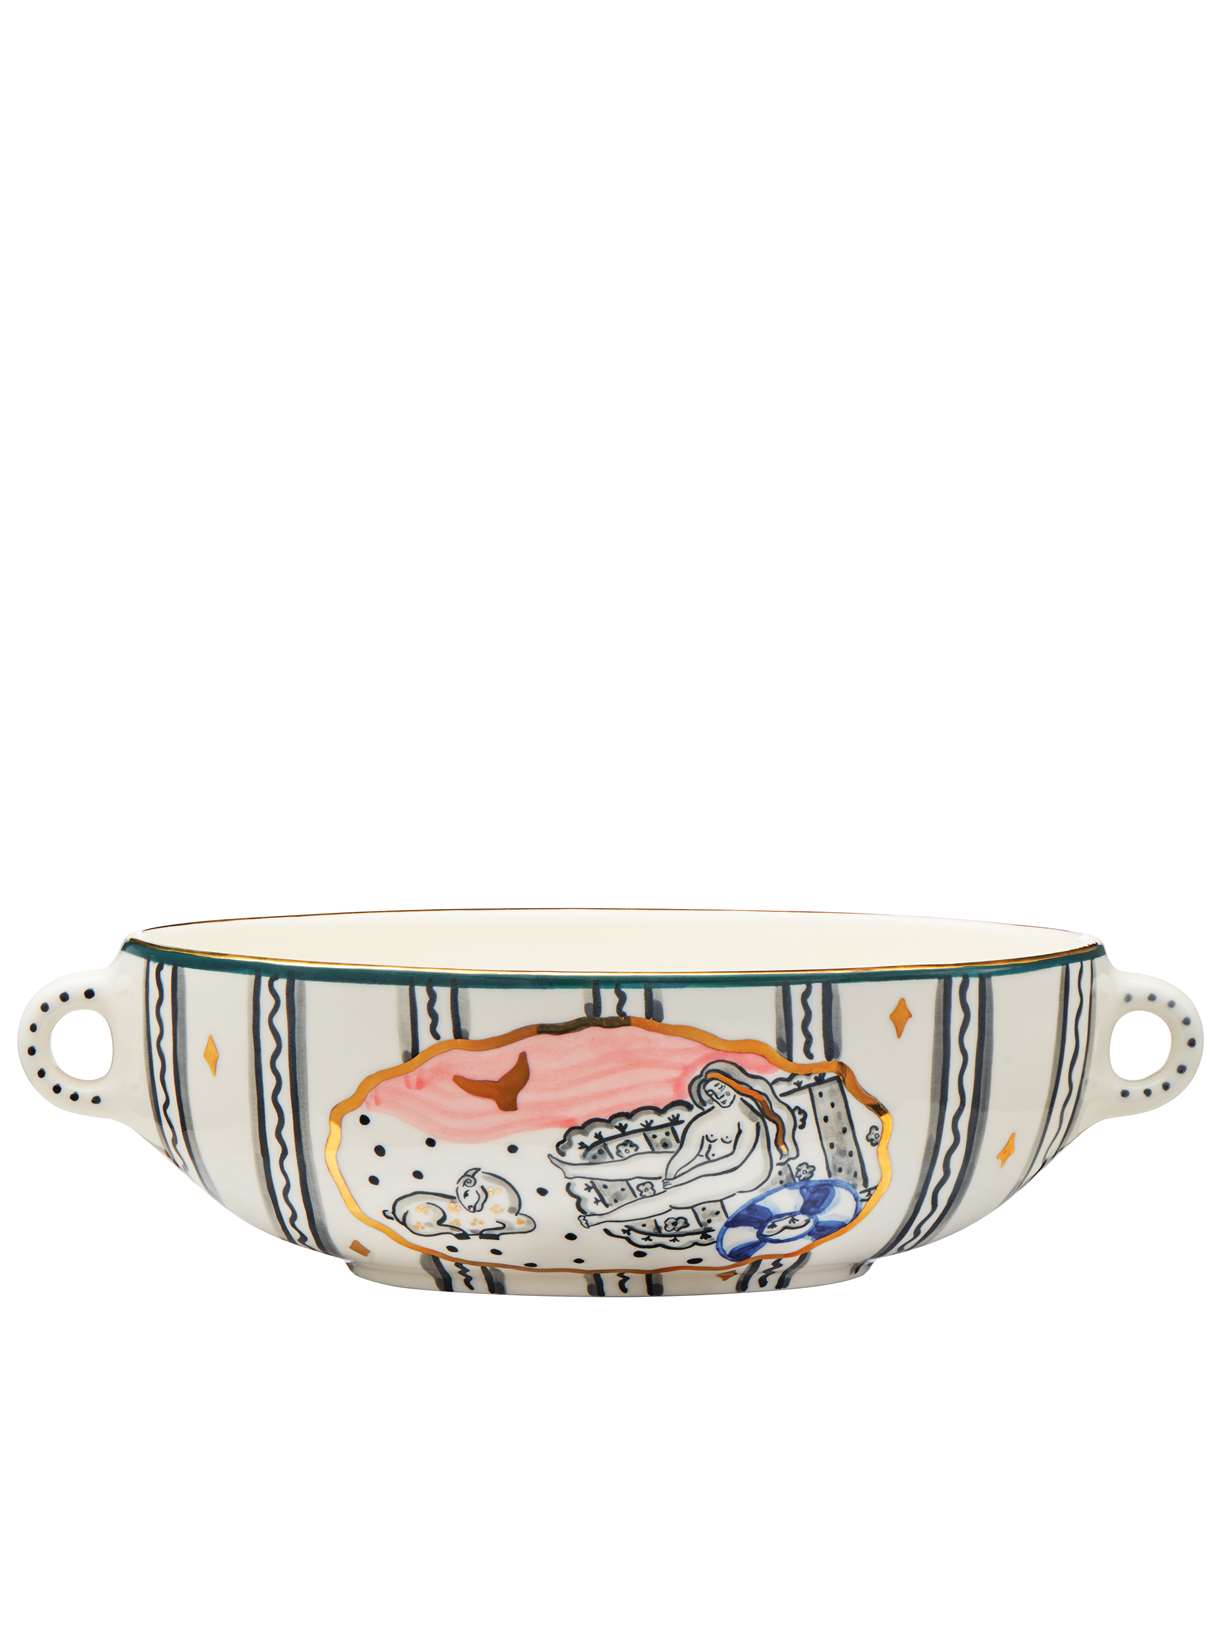 MERMAIDS AND FIGS FRUIT BOWL